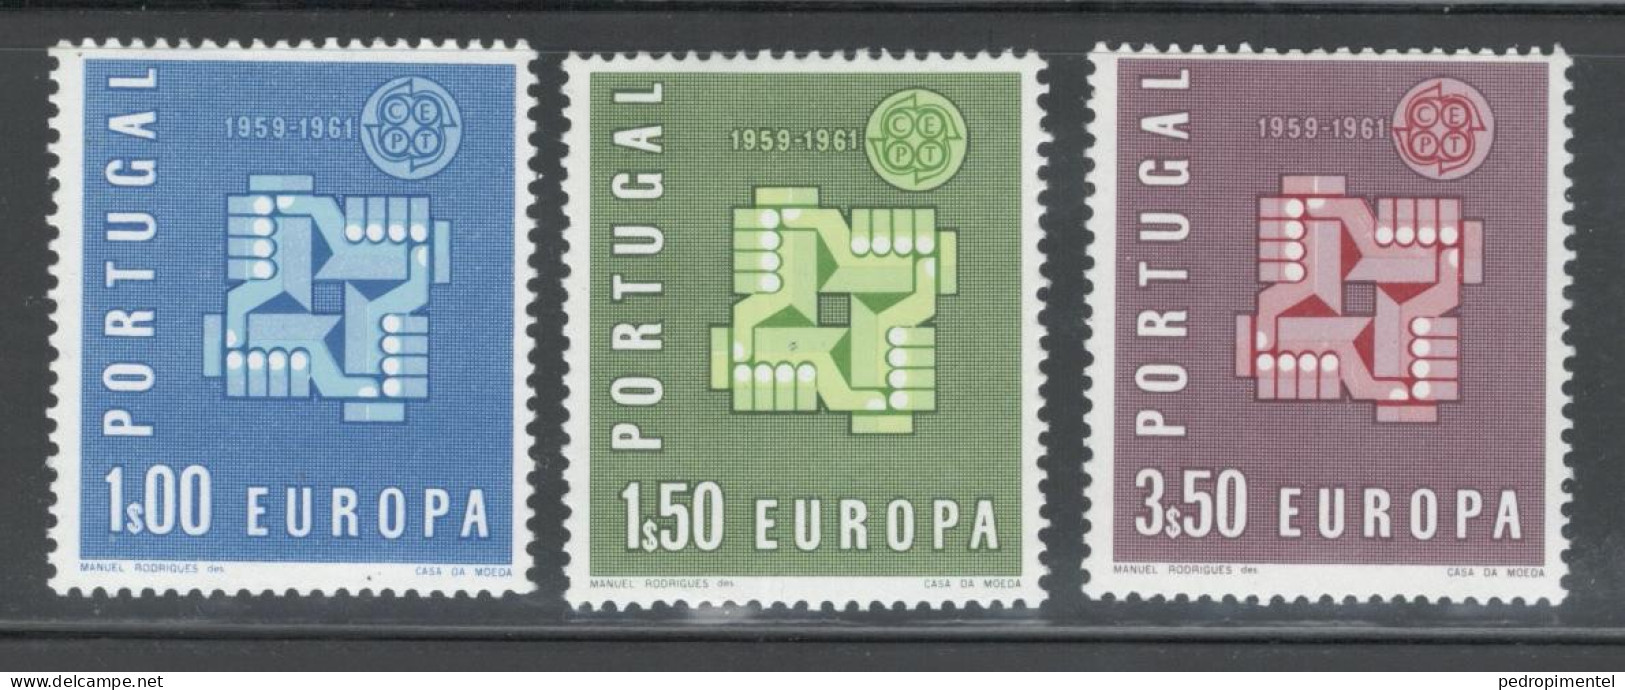 Portugal Stamps 1961 "Europa CEPT" Condition MH #878-880 - Ongebruikt